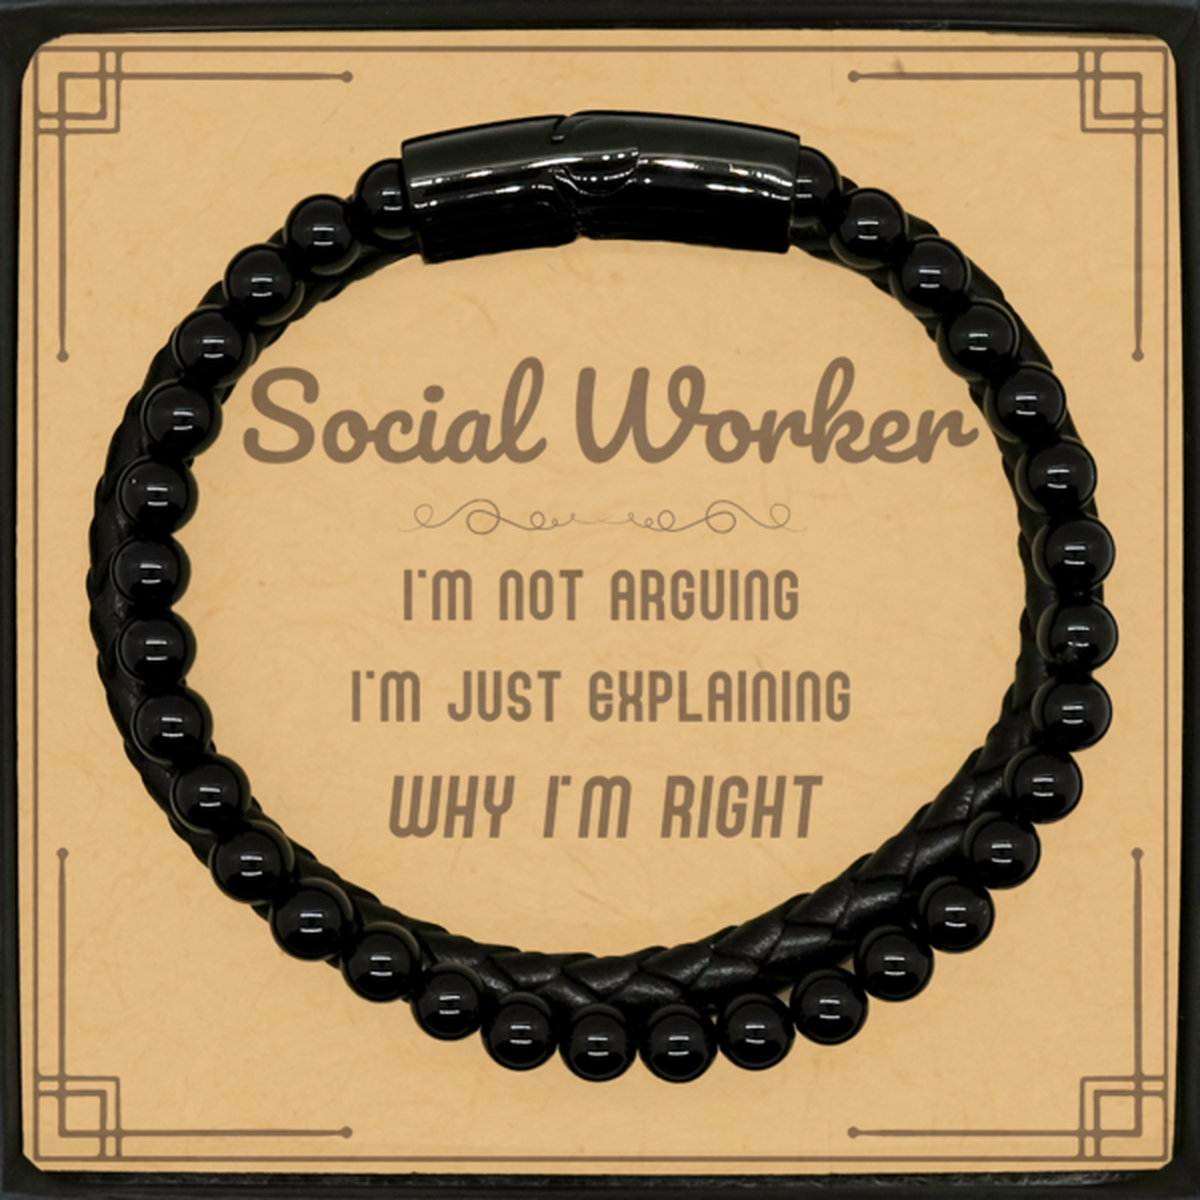 Social Worker I'm not Arguing. I'm Just Explaining Why I'm RIGHT Stone Leather Bracelets, Funny Saying Quote Social Worker Gifts For Social Worker Message Card Graduation Birthday Christmas Gifts for Men Women Coworker